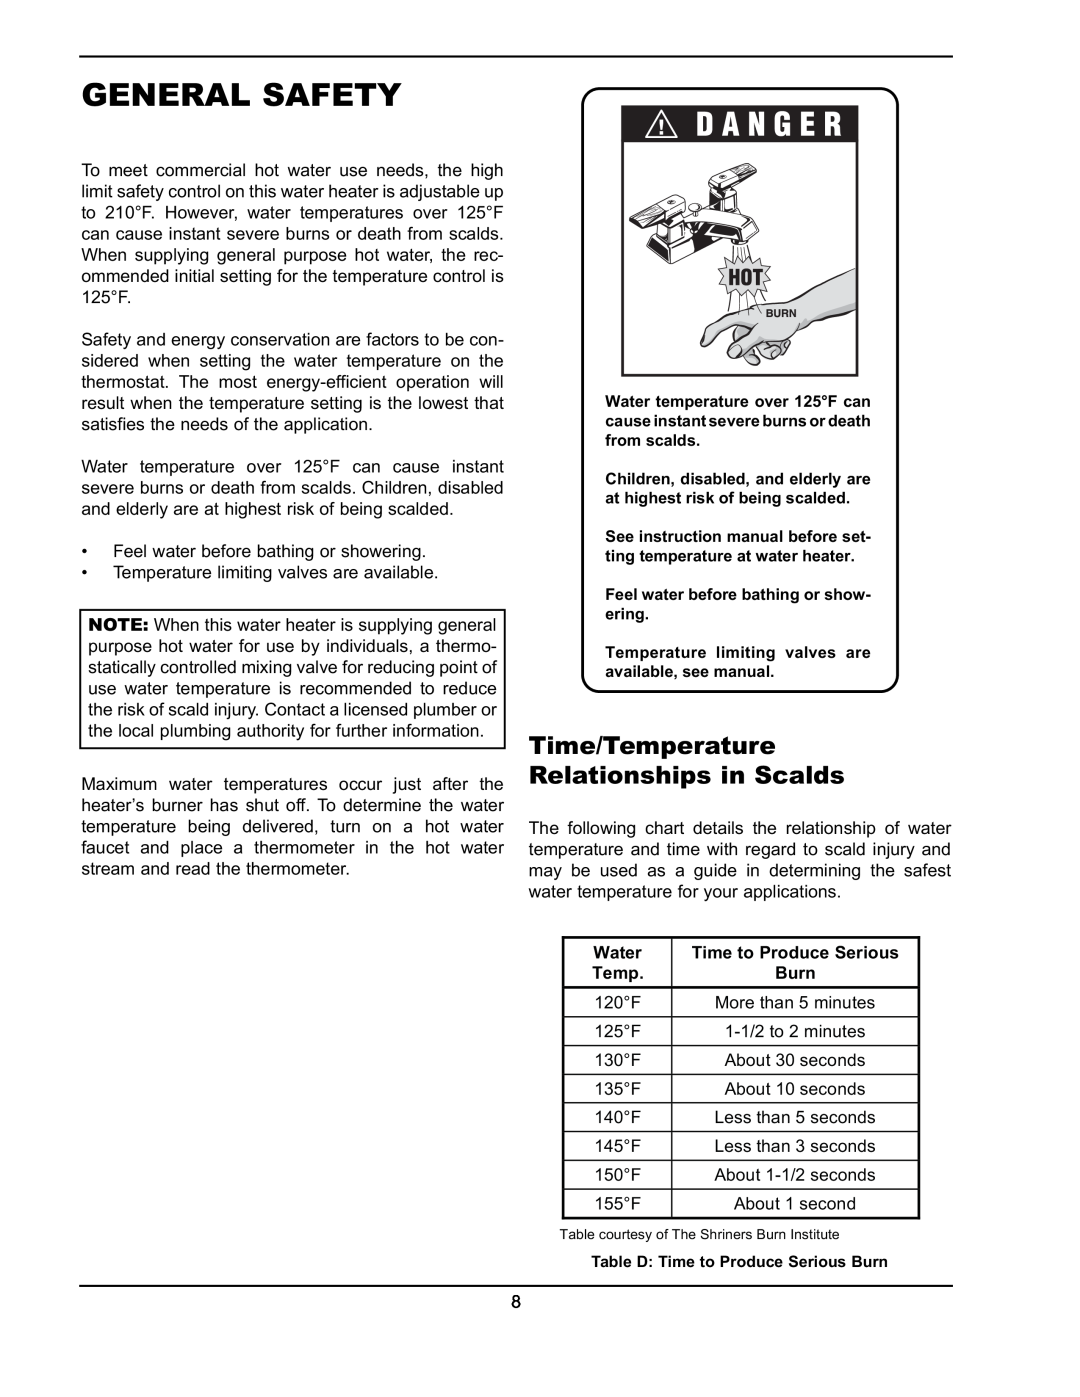 Raypak 302A-902A manual General Safety, Time/Temperature Relationships in Scalds 